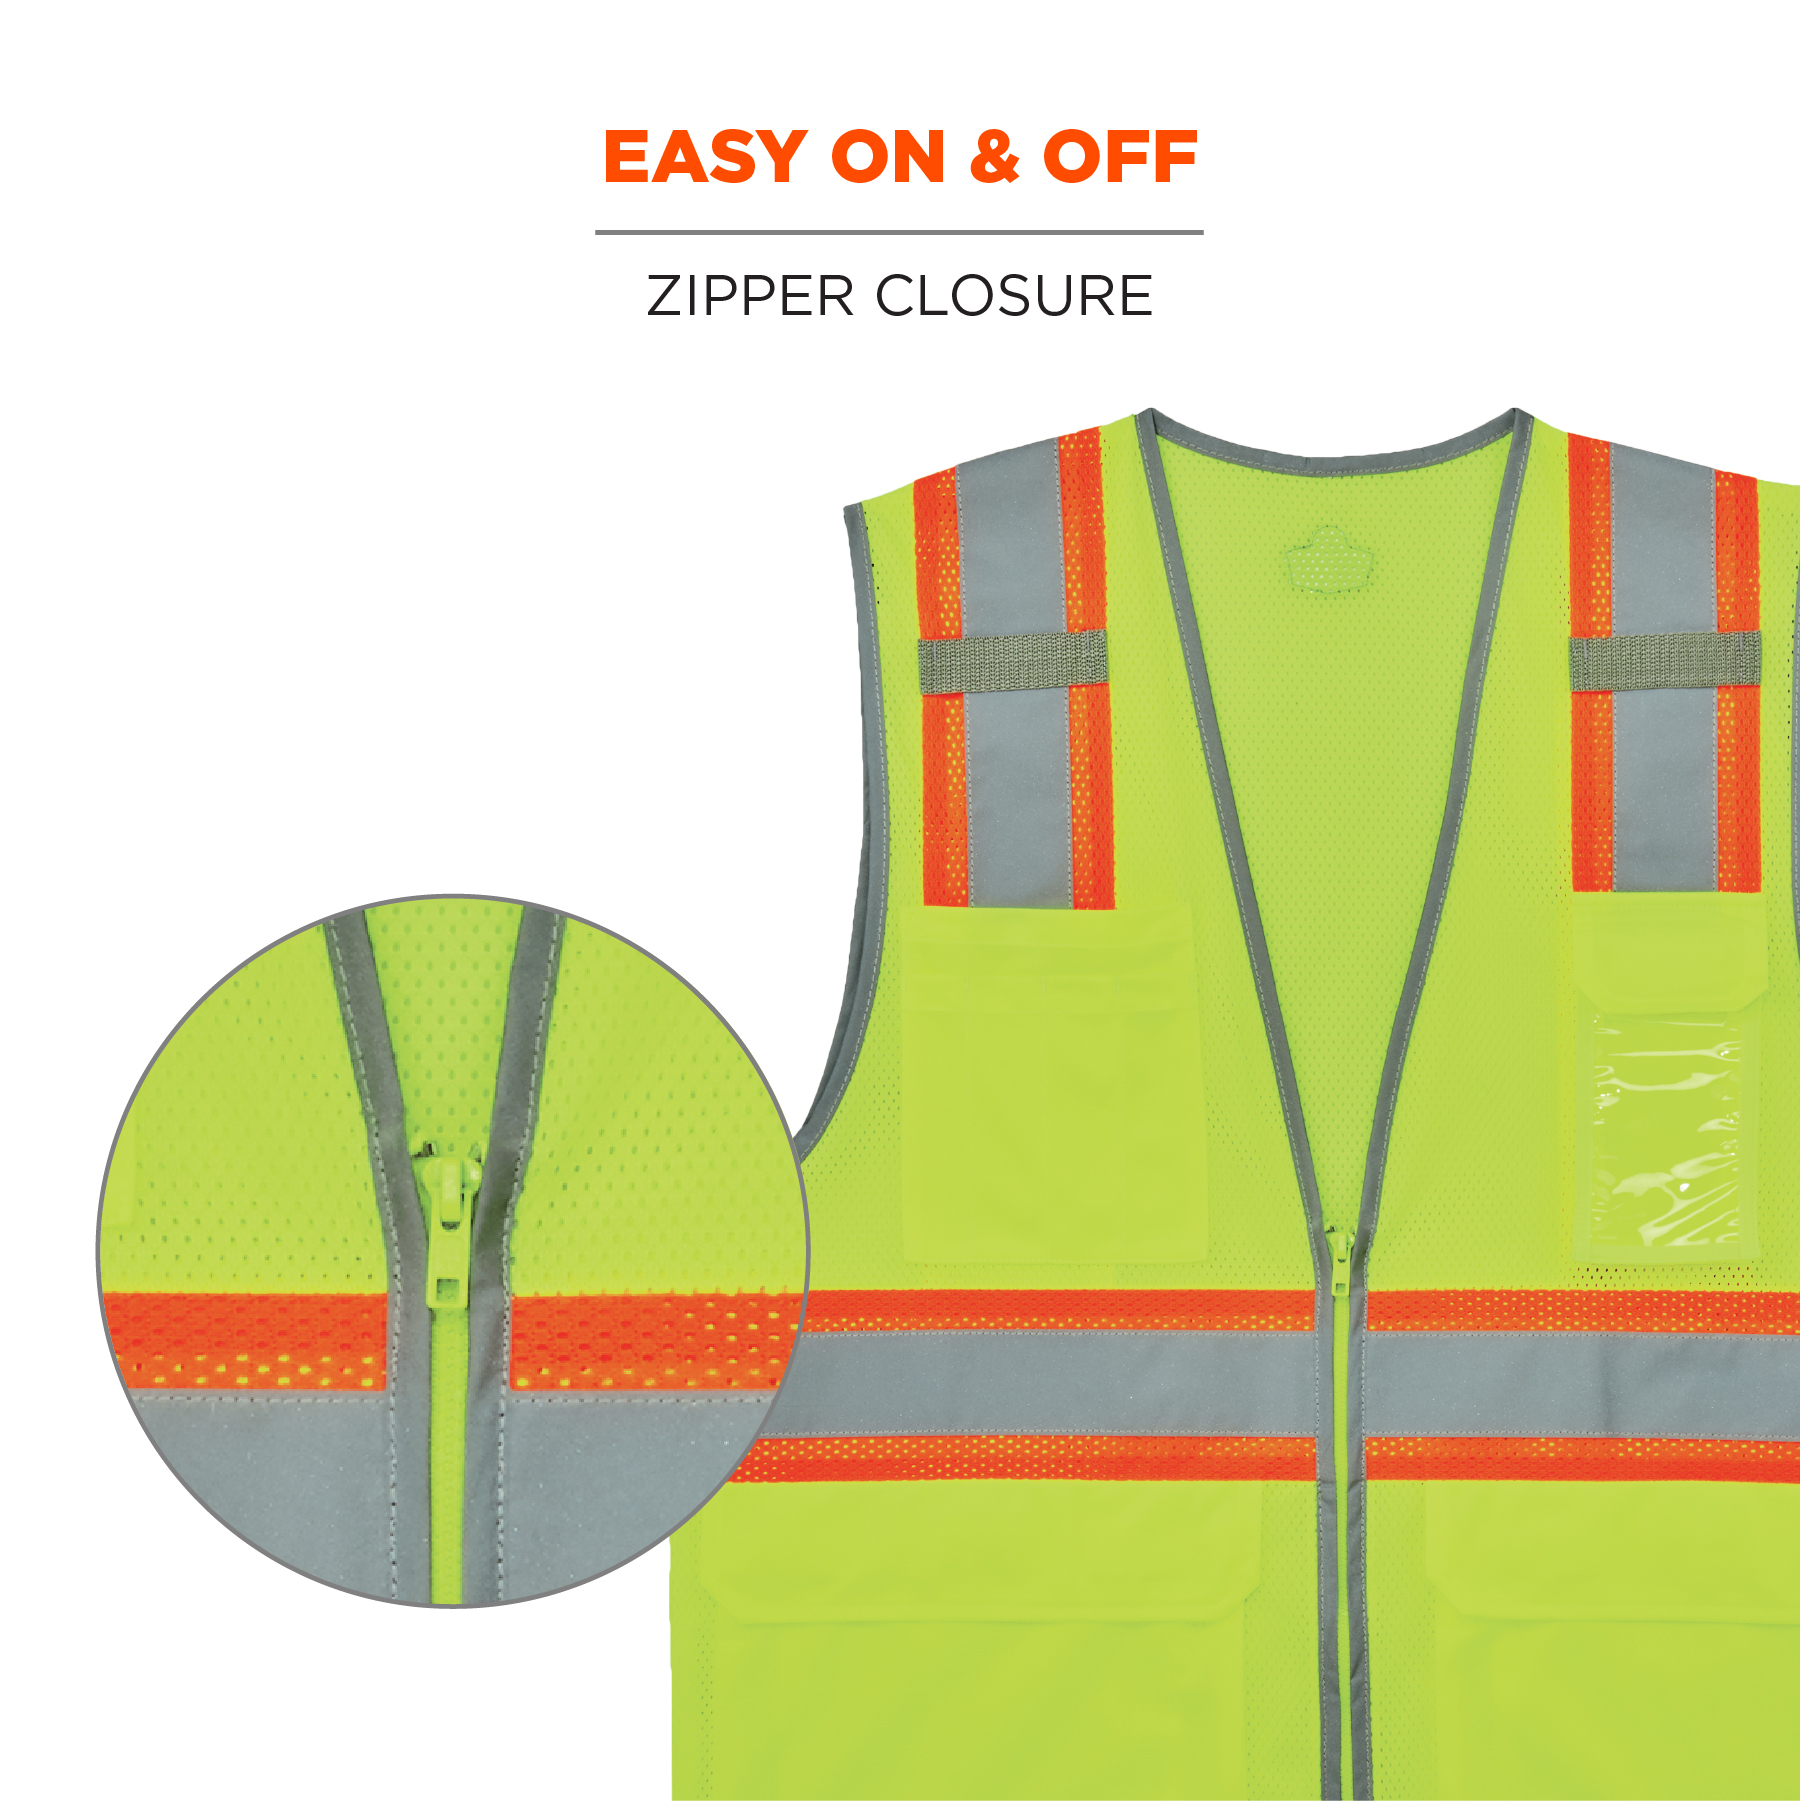 RK Safety 9811 Two Tone High Visibility Safety Vest with Reflective Strips and Pockets ANSI/ISEA Standard- Class 2 Medium, Neon Orange RK Industries Group Inc. 